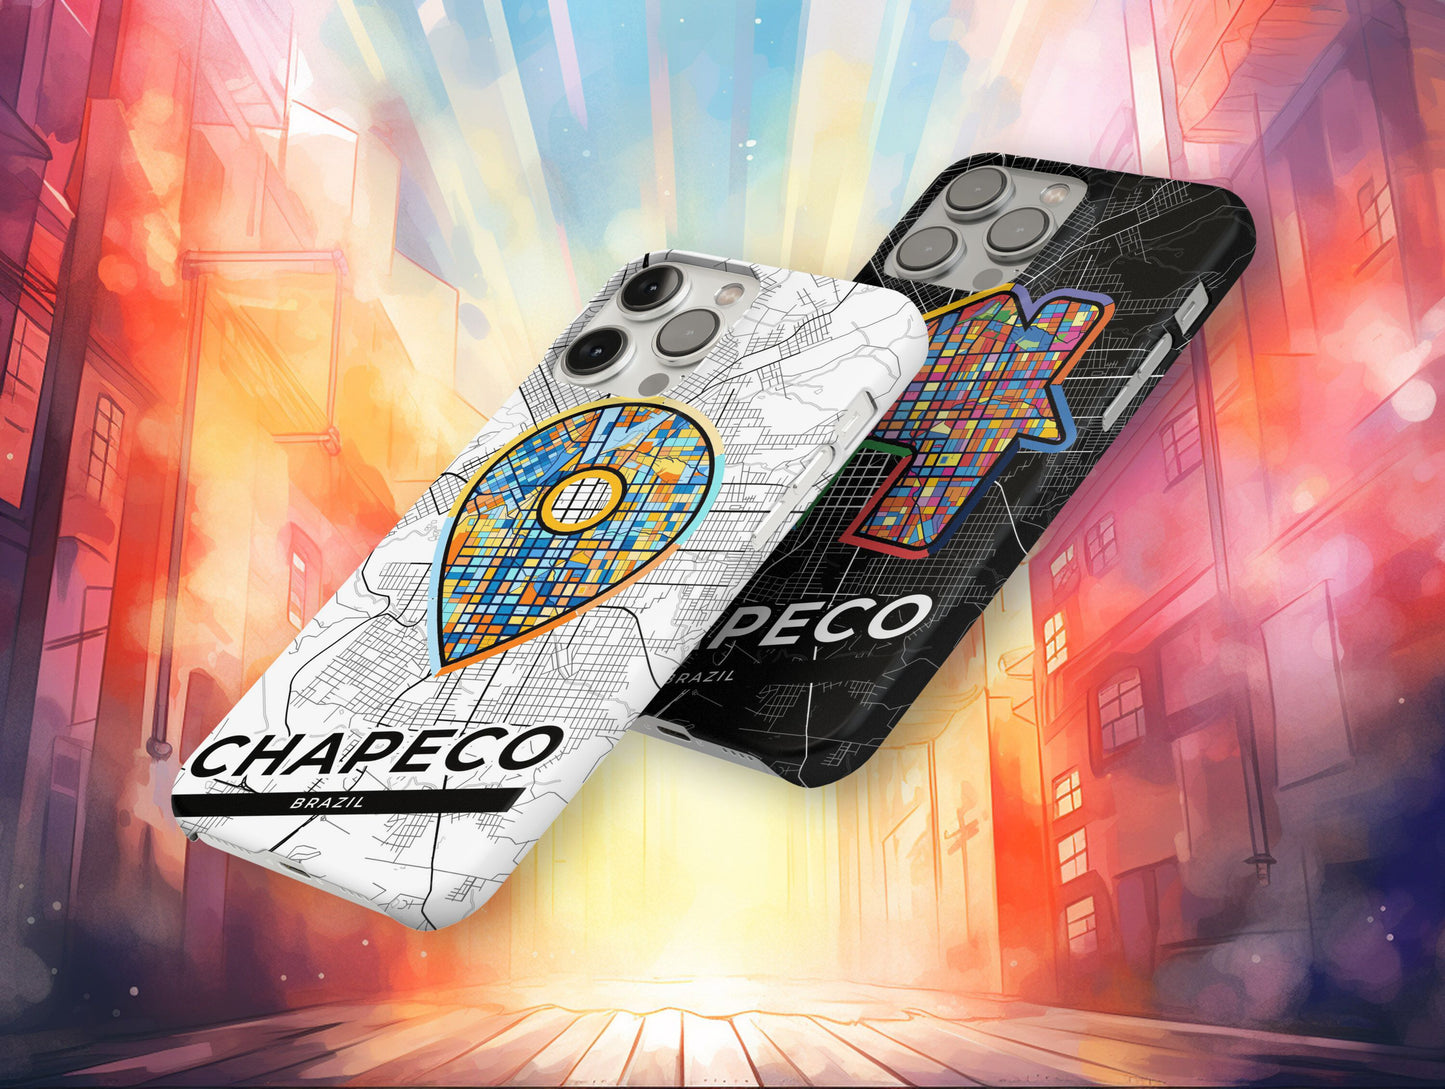 Chapeco Brazil slim phone case with colorful icon. Birthday, wedding or housewarming gift. Couple match cases.